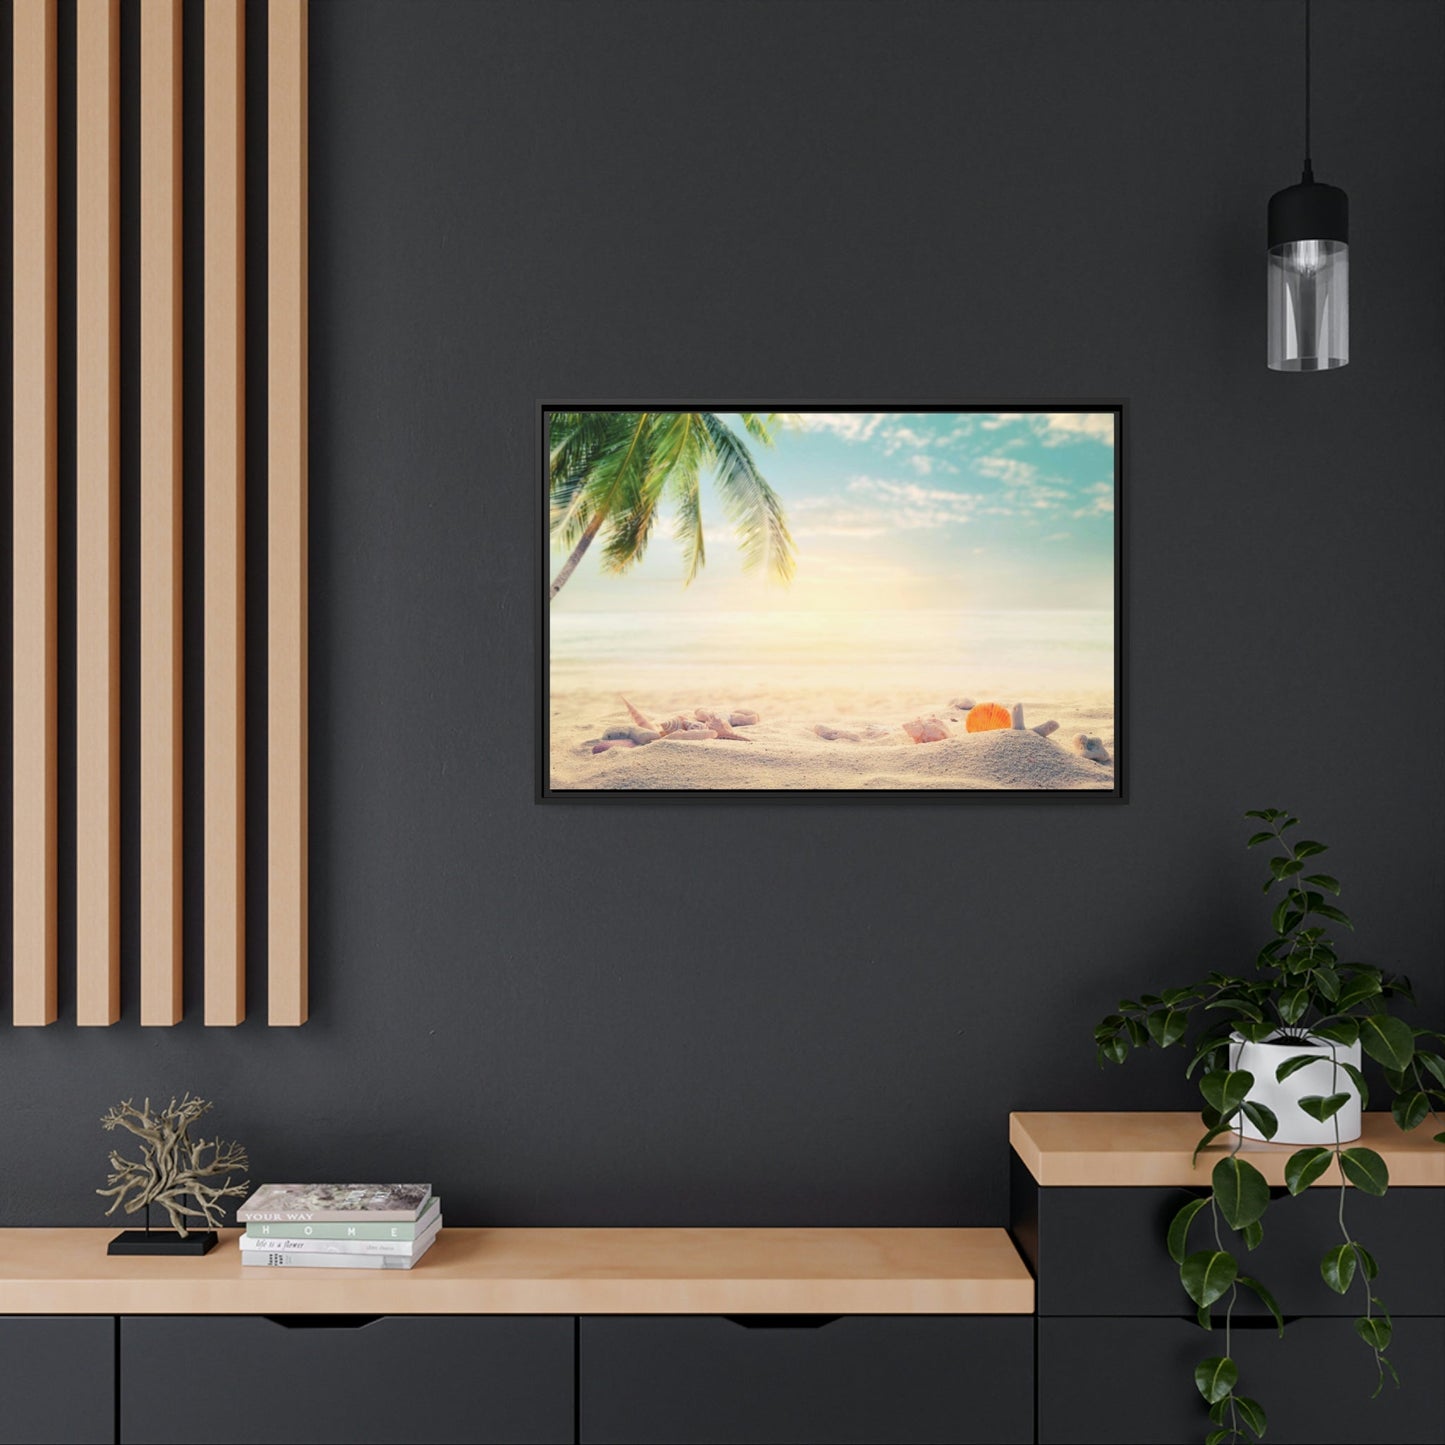 Seascape Tranquility: Coastal Framed Poster & Canvas of a Calm Beach View